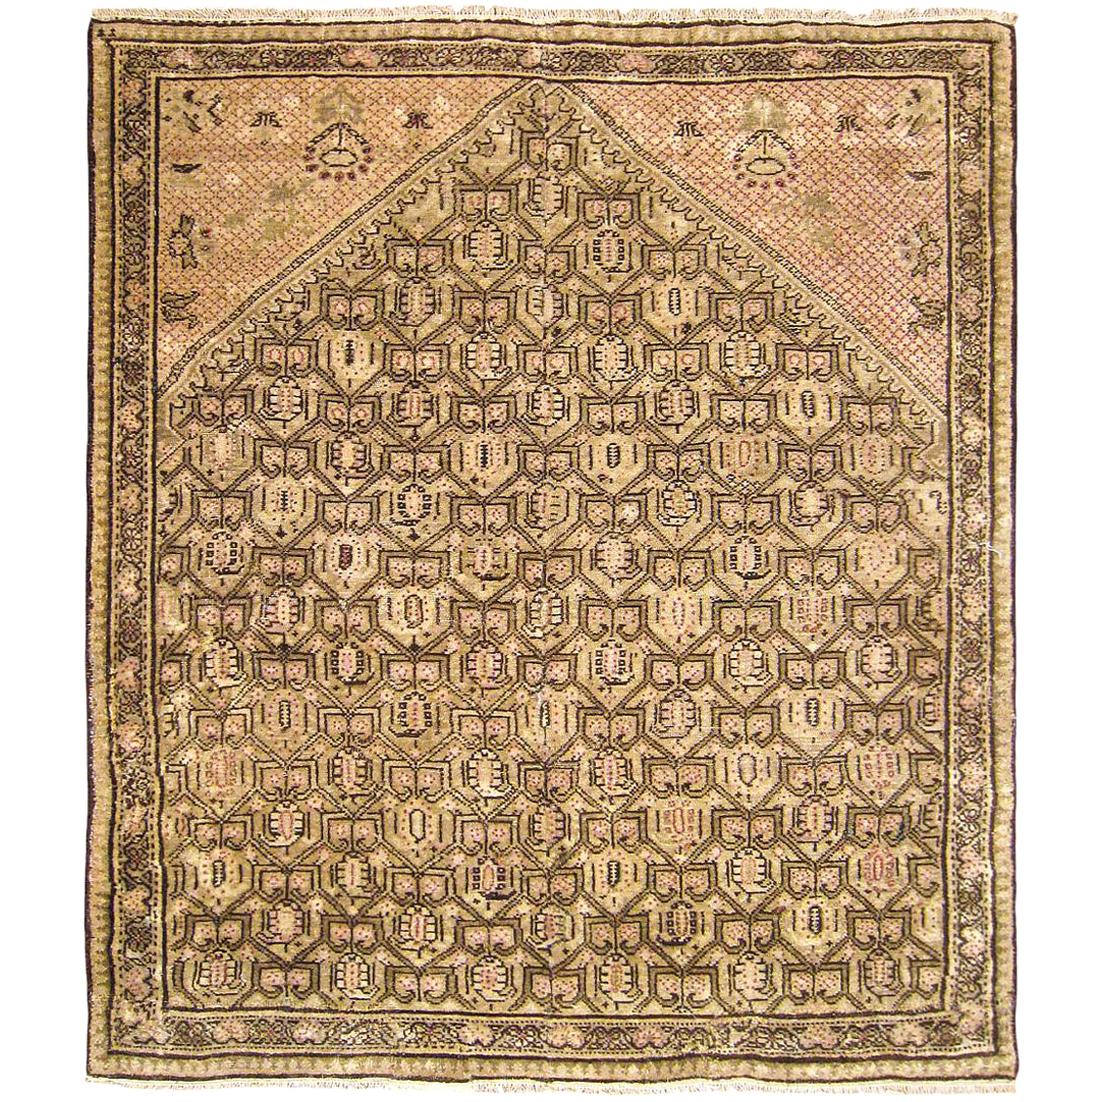 Antique Persian Seneh Oriental Rug, in Small Square Size, with Soft Earth Tones